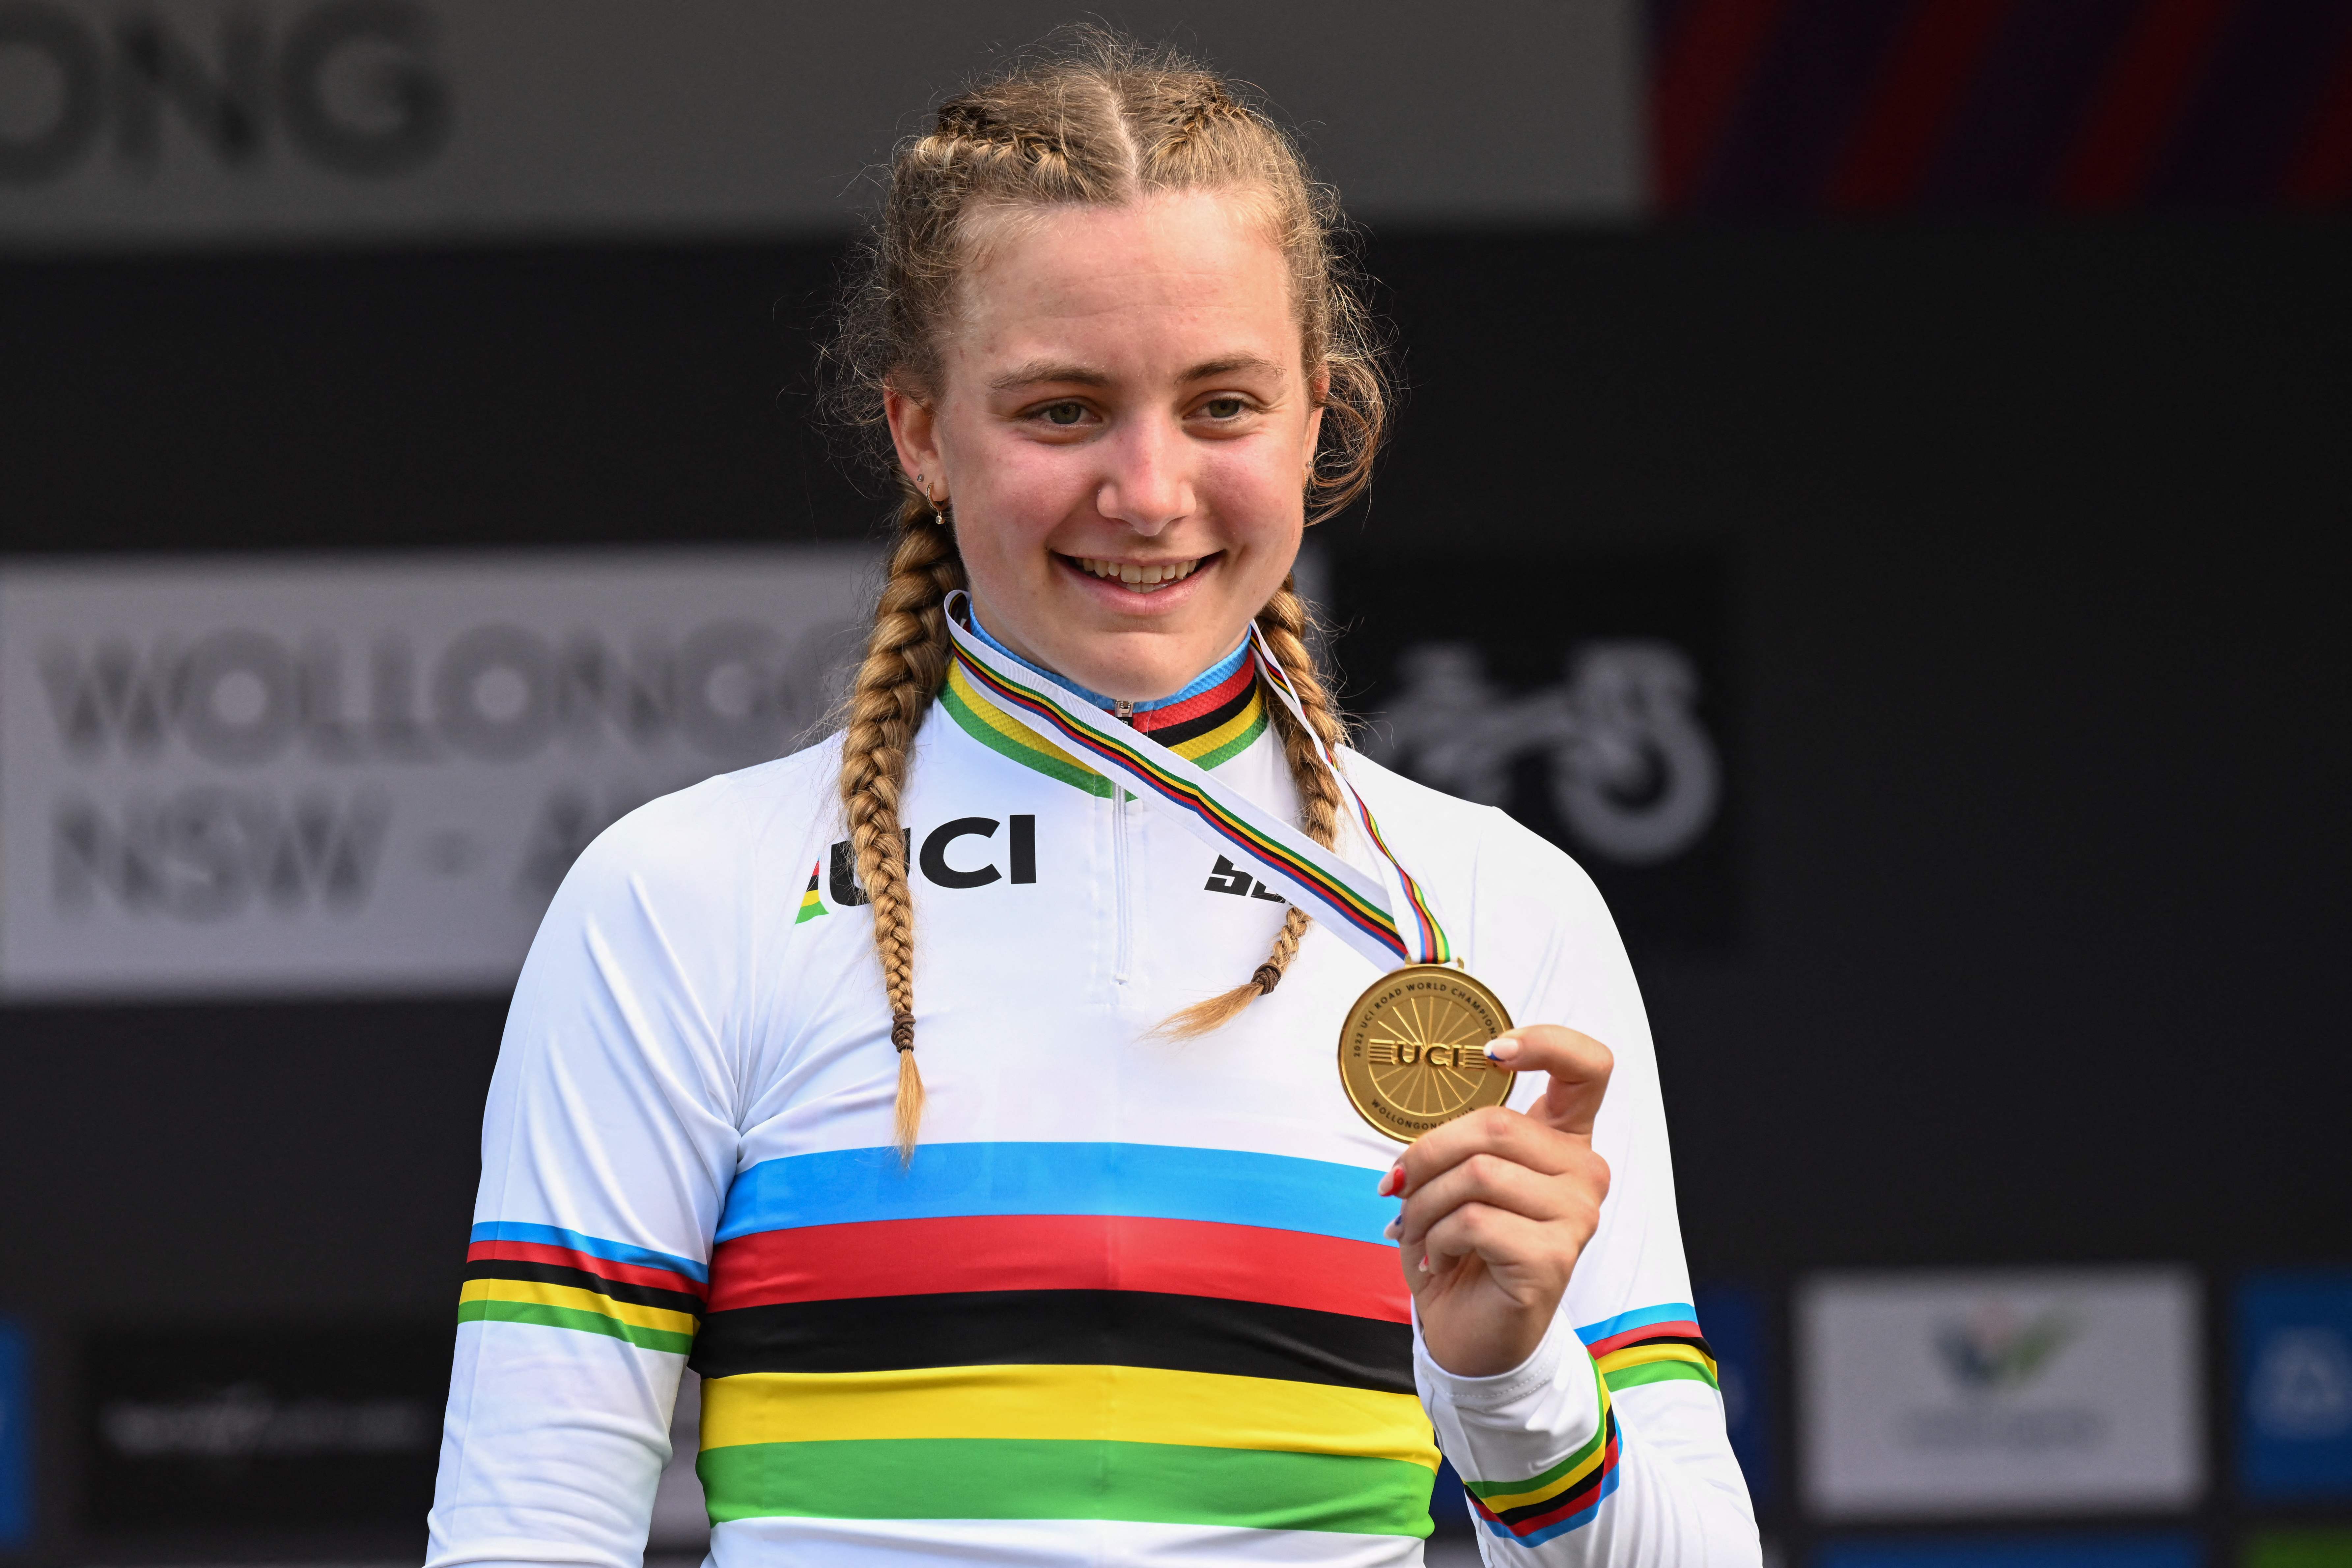 Zoe Backstedt stormed to victory Down Under